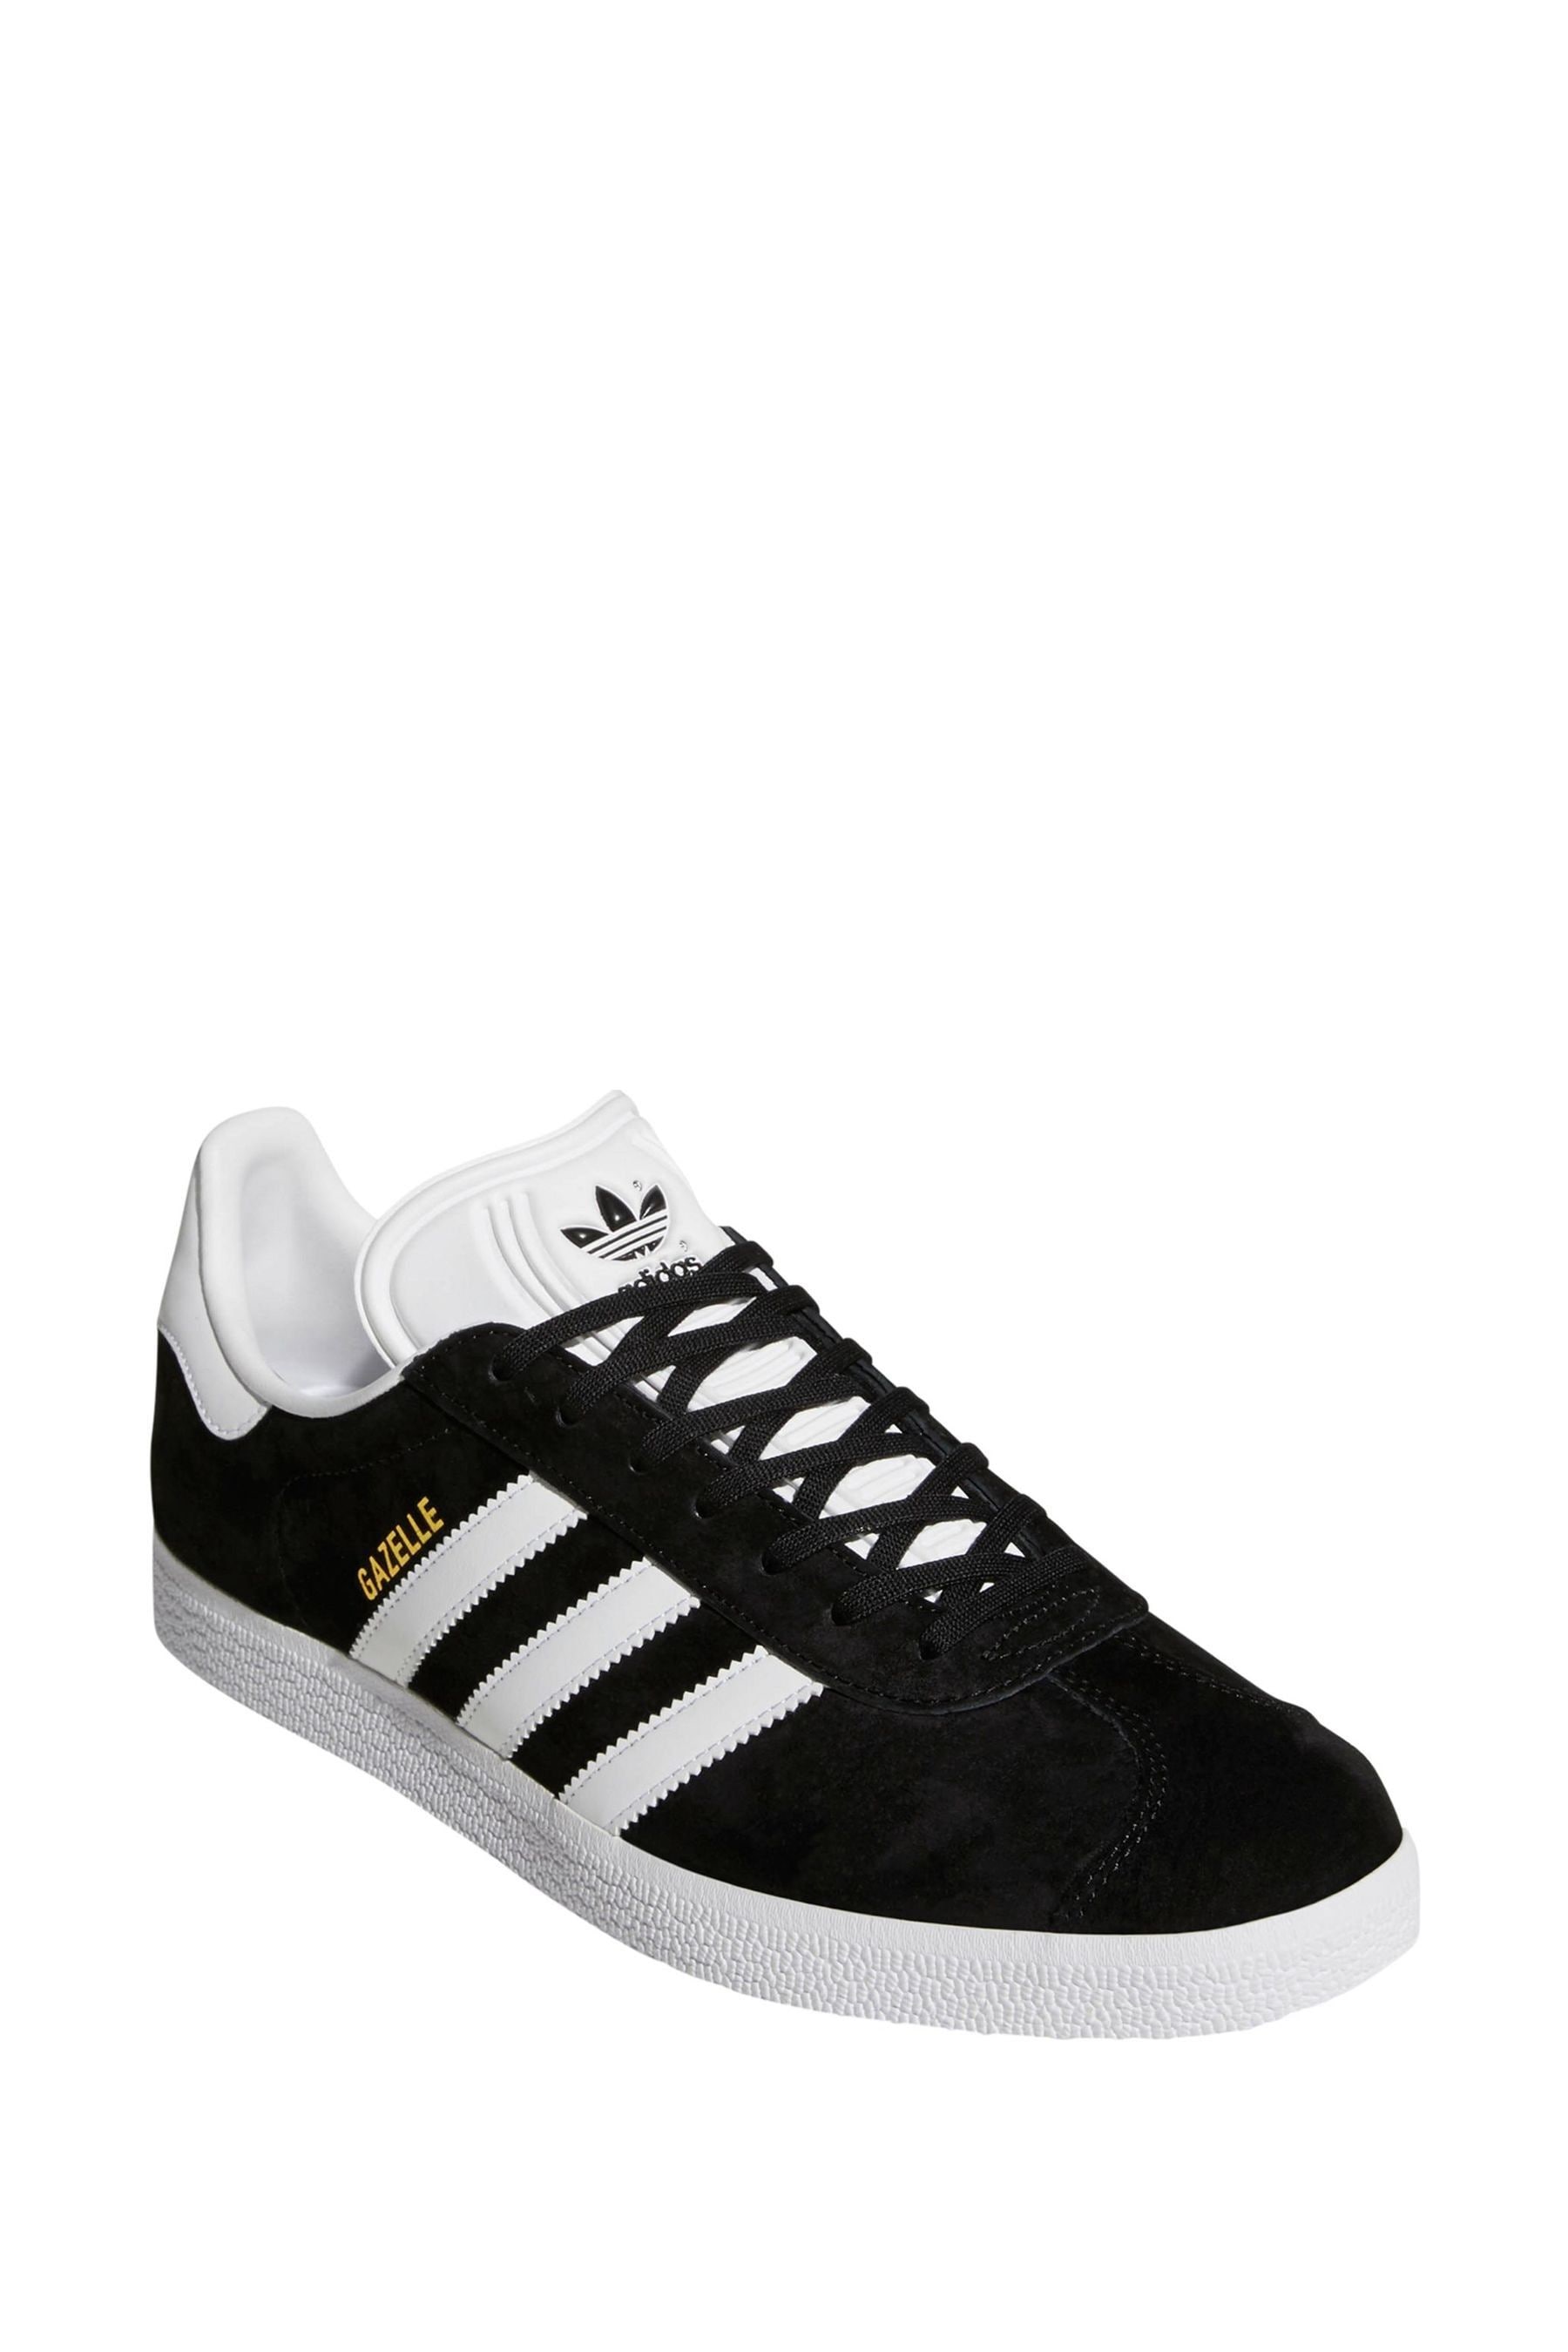 Buy adidas Originals Gazelle Trainers from the Next UK online shop